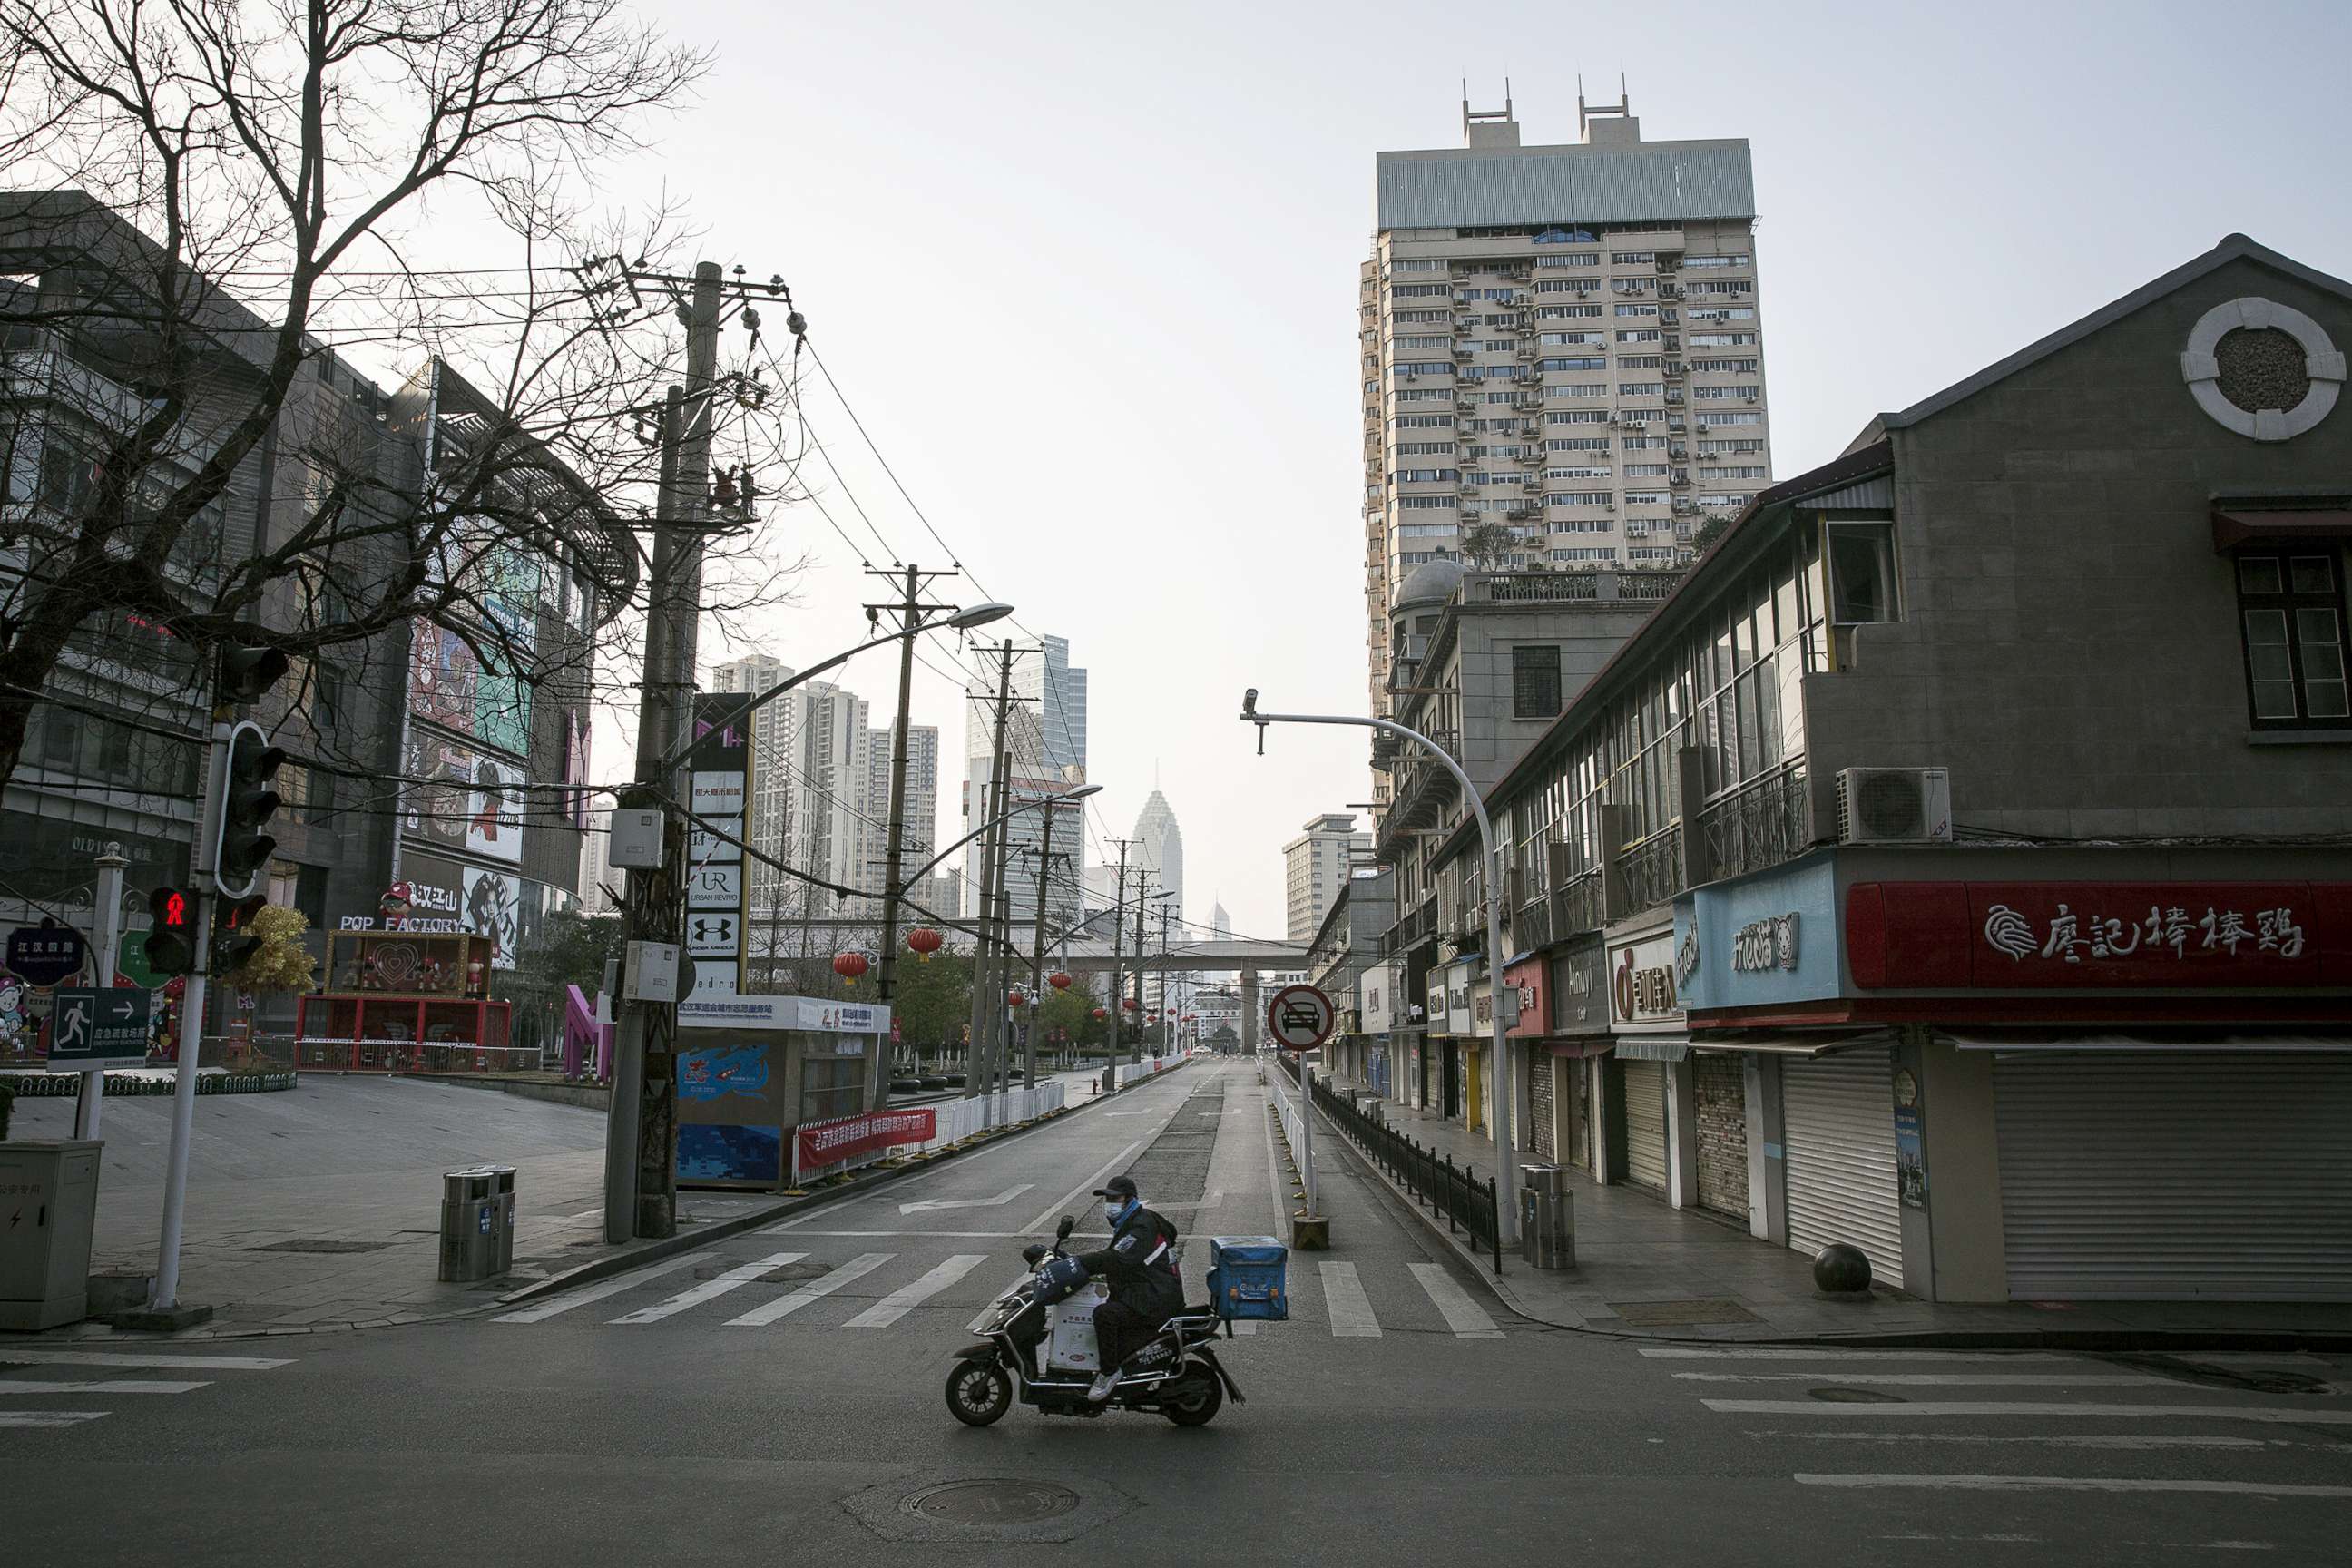 PHOTO: A man wears a protective mask as he rides a scooter on an empty business street, Feb. 13, 2020, in Wuhan, China.